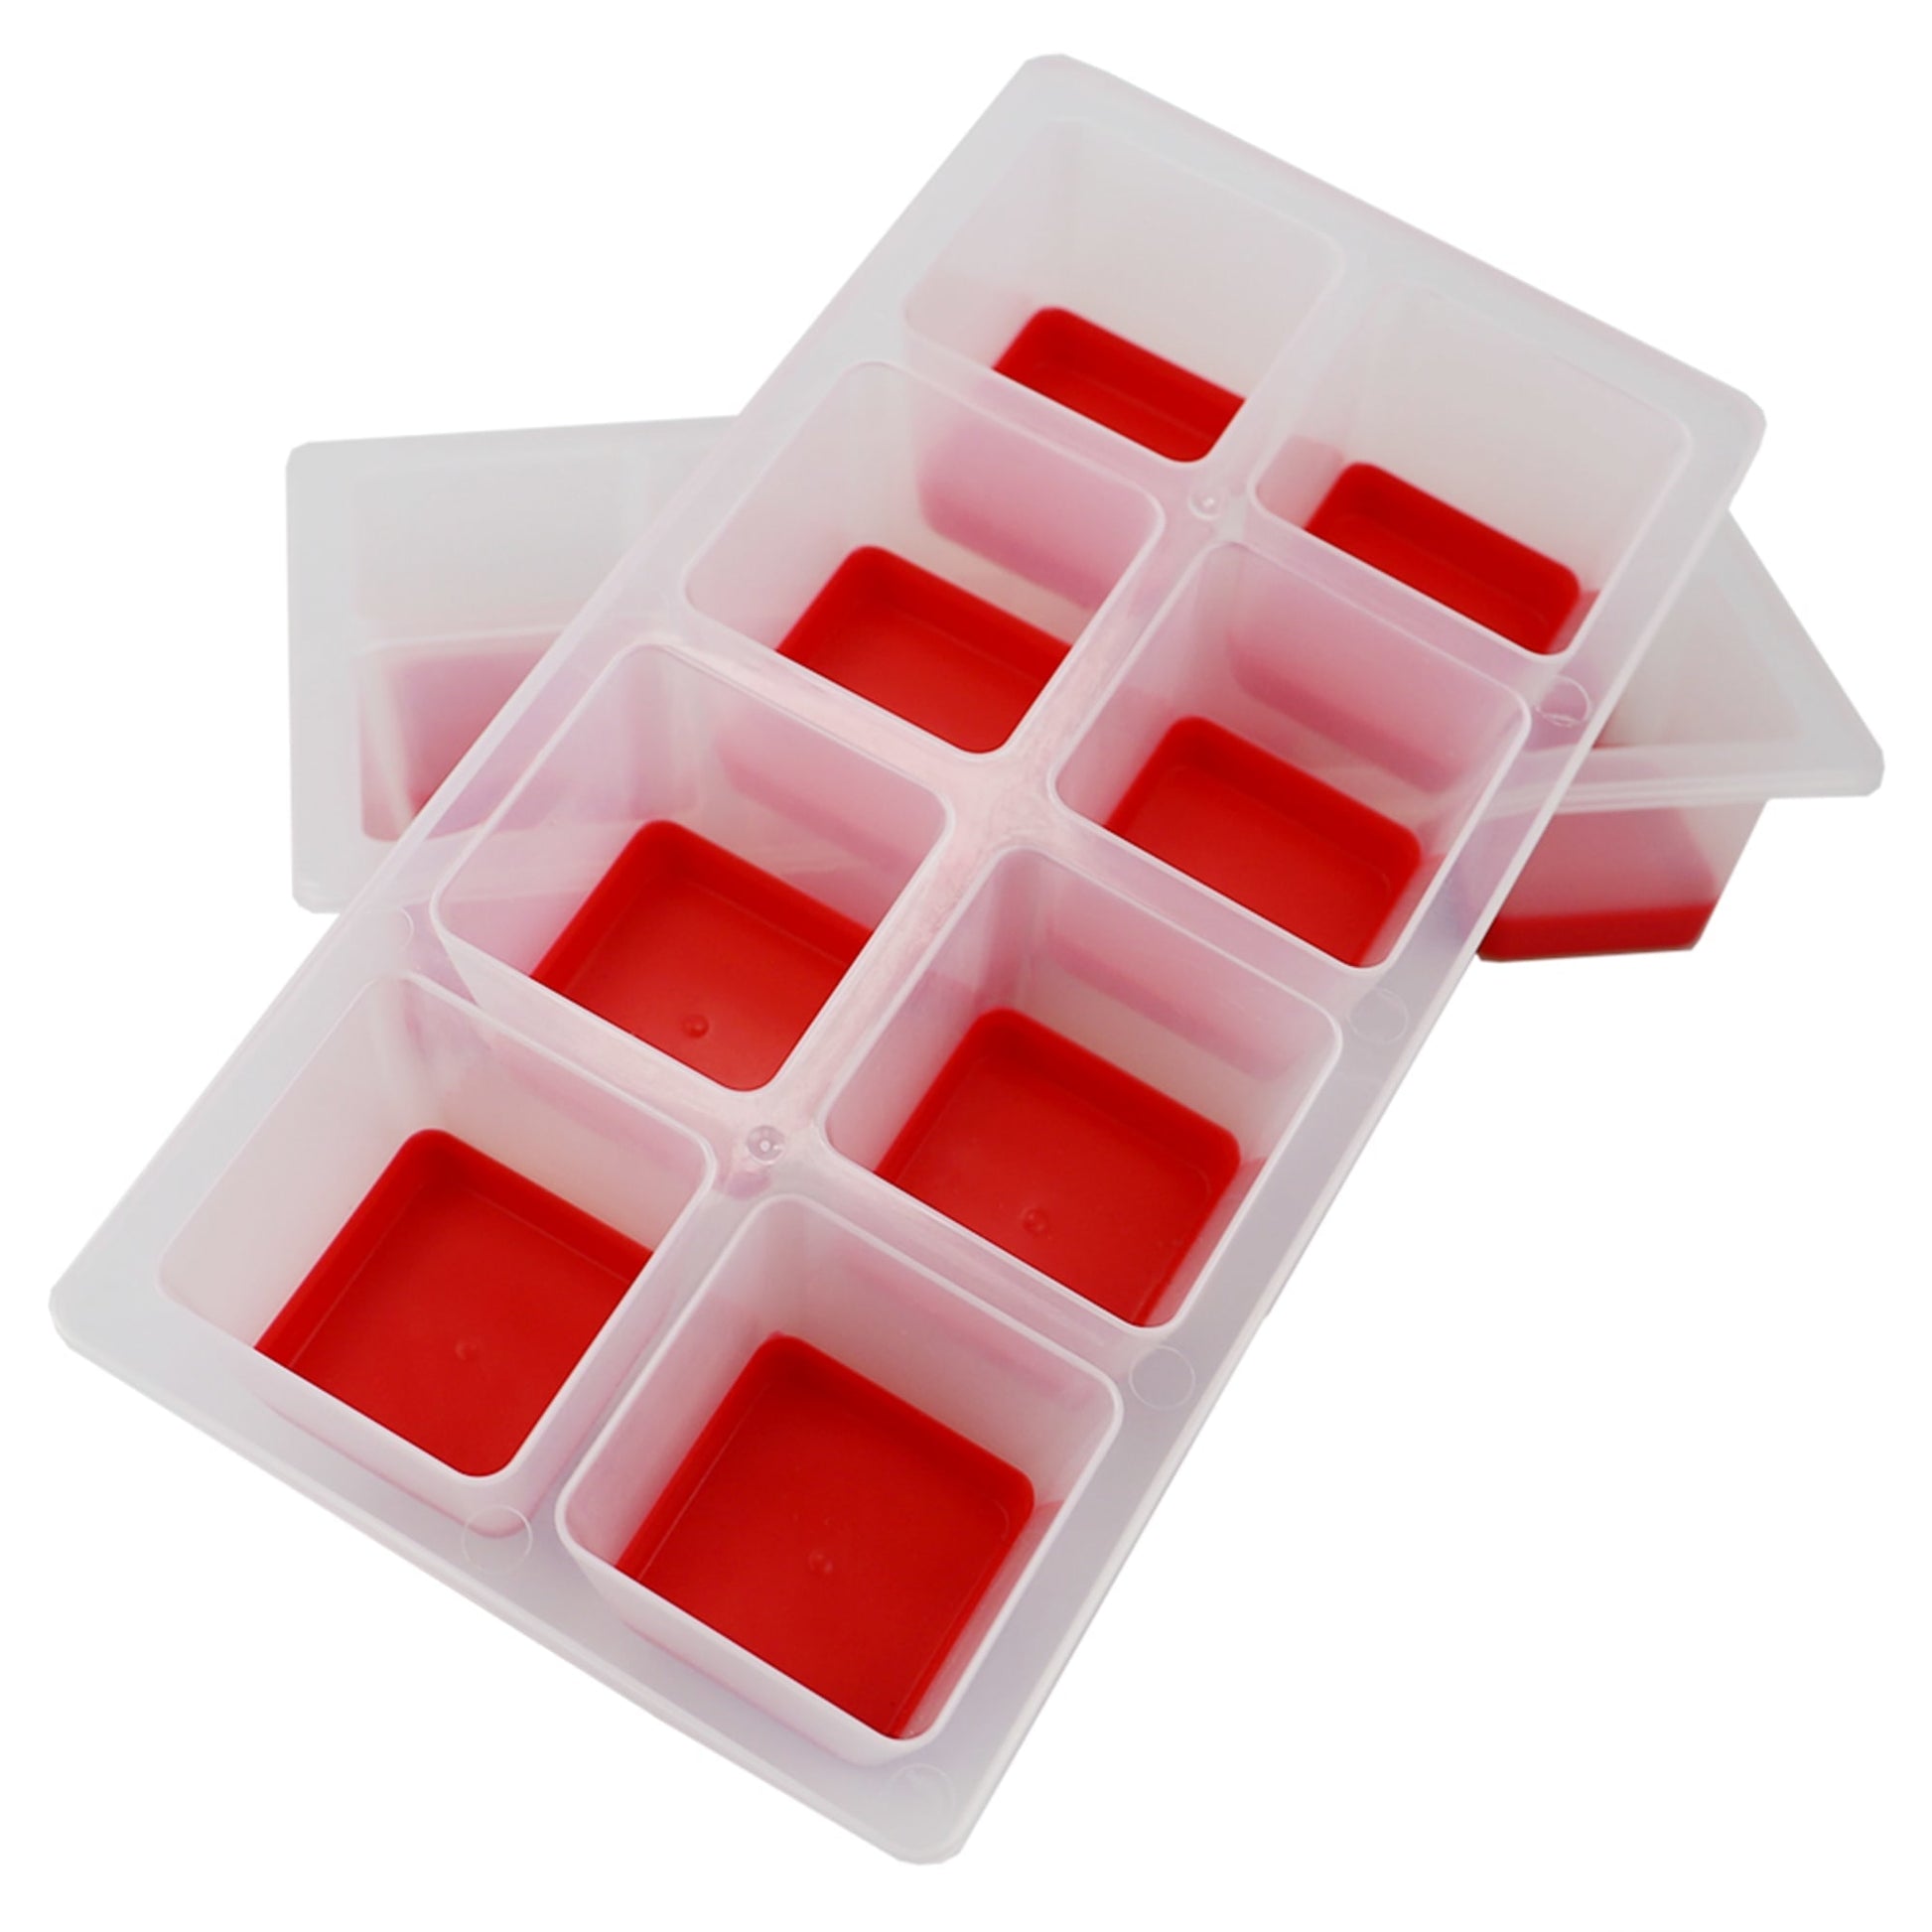 8 Compartment Instant Release Jumbo Plastic Ice Cube Tray, (Pack of 2)